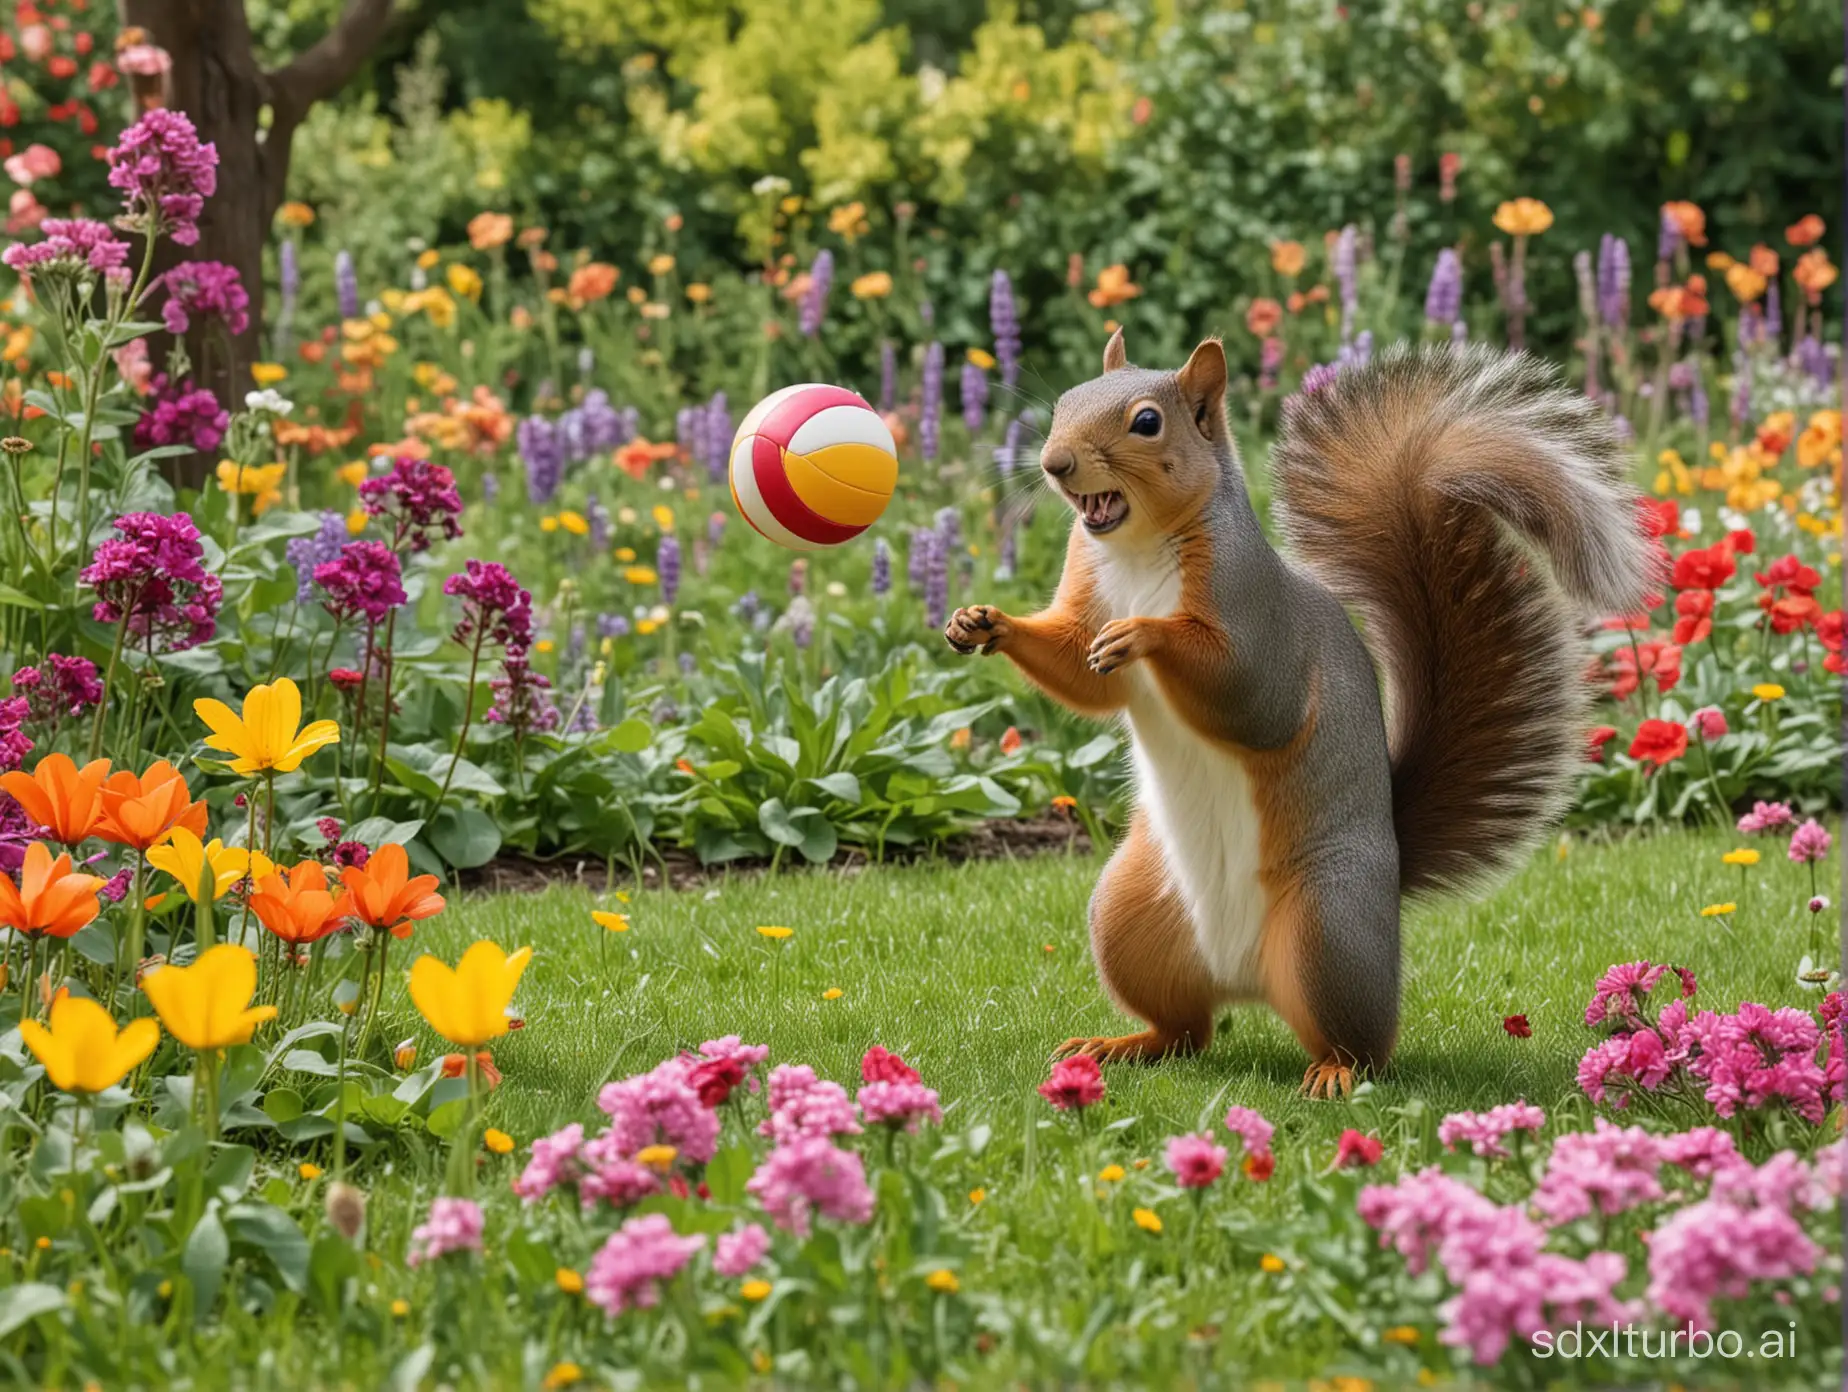 A happy squirrel plays volleyball in a garden with many colorful flowers.